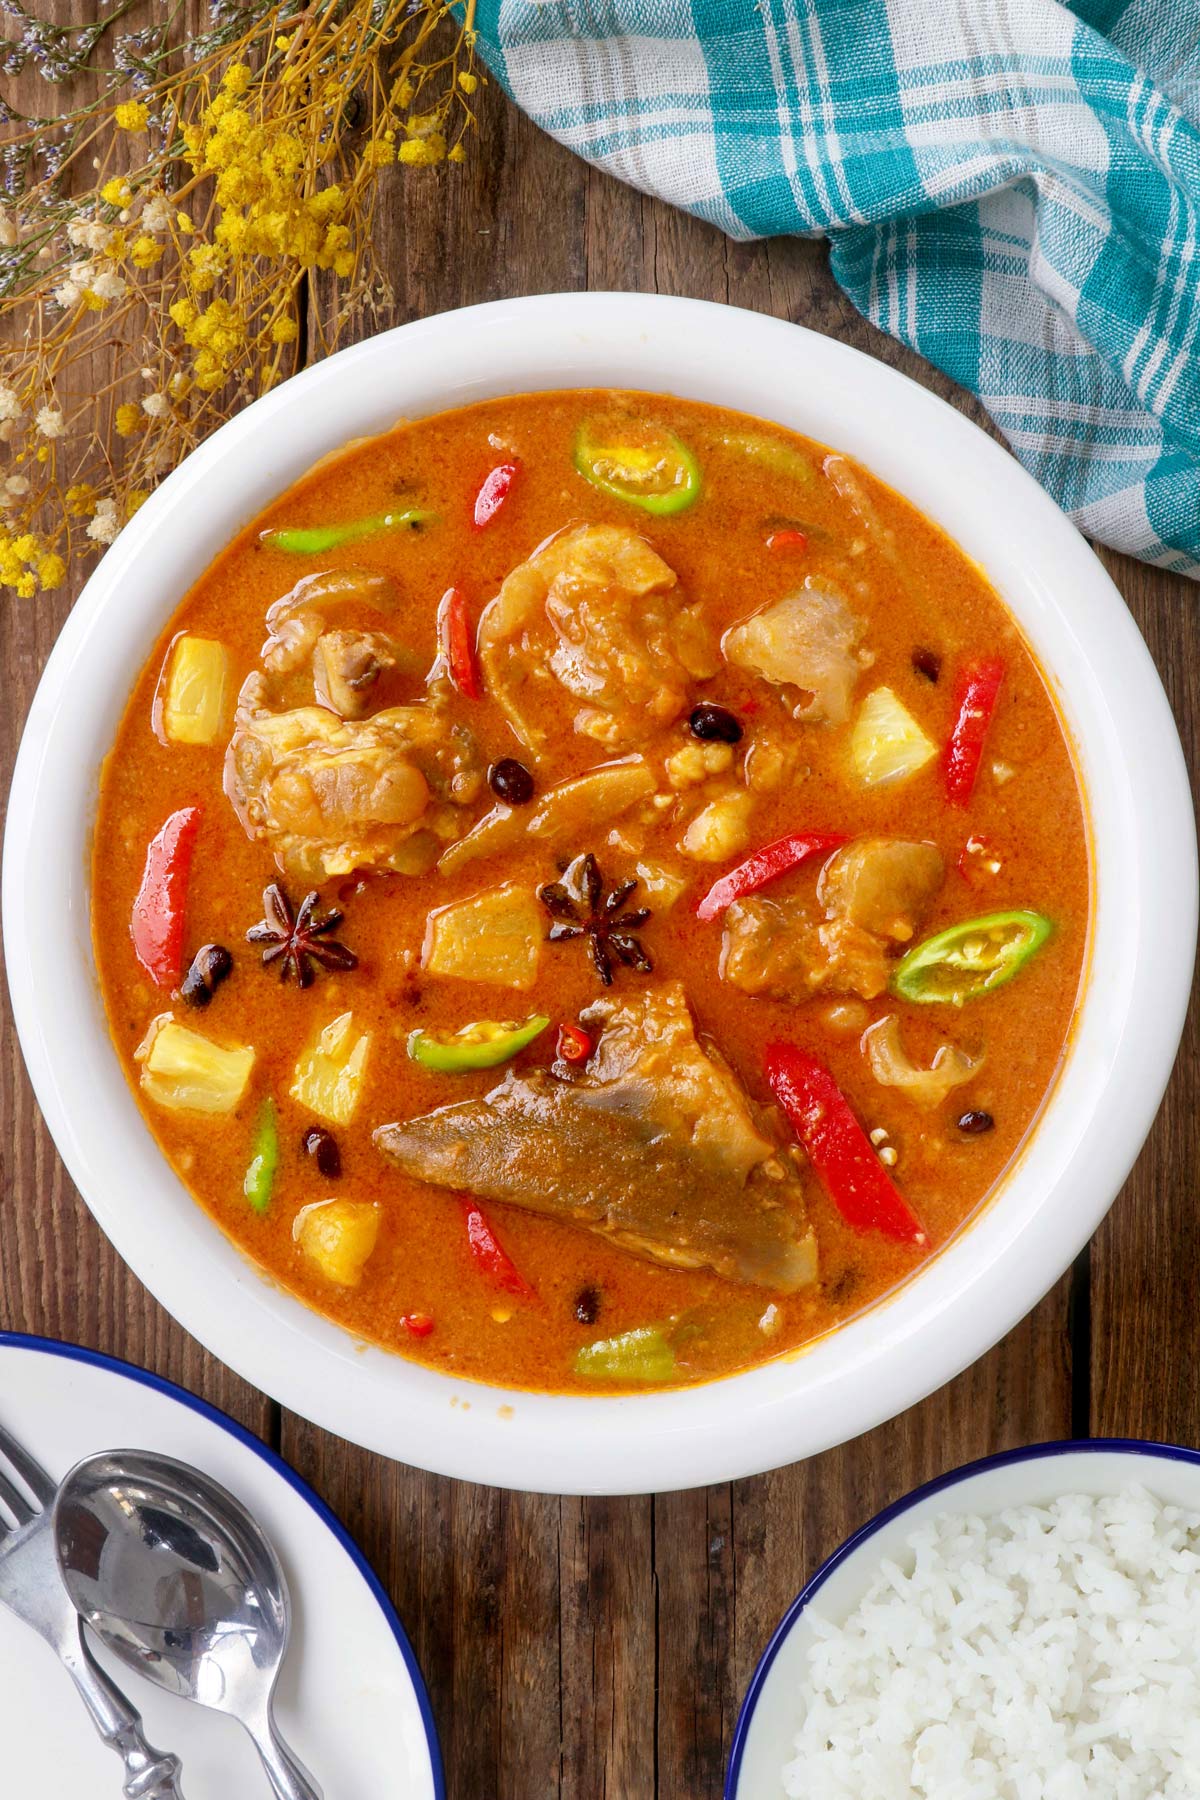 Balbacua is a Filipino stew made with ox feet with pineapple chunks, pork and beans and bell pepper simmered in a hearty stew flavored with annatto, star anise, and peanut butter.